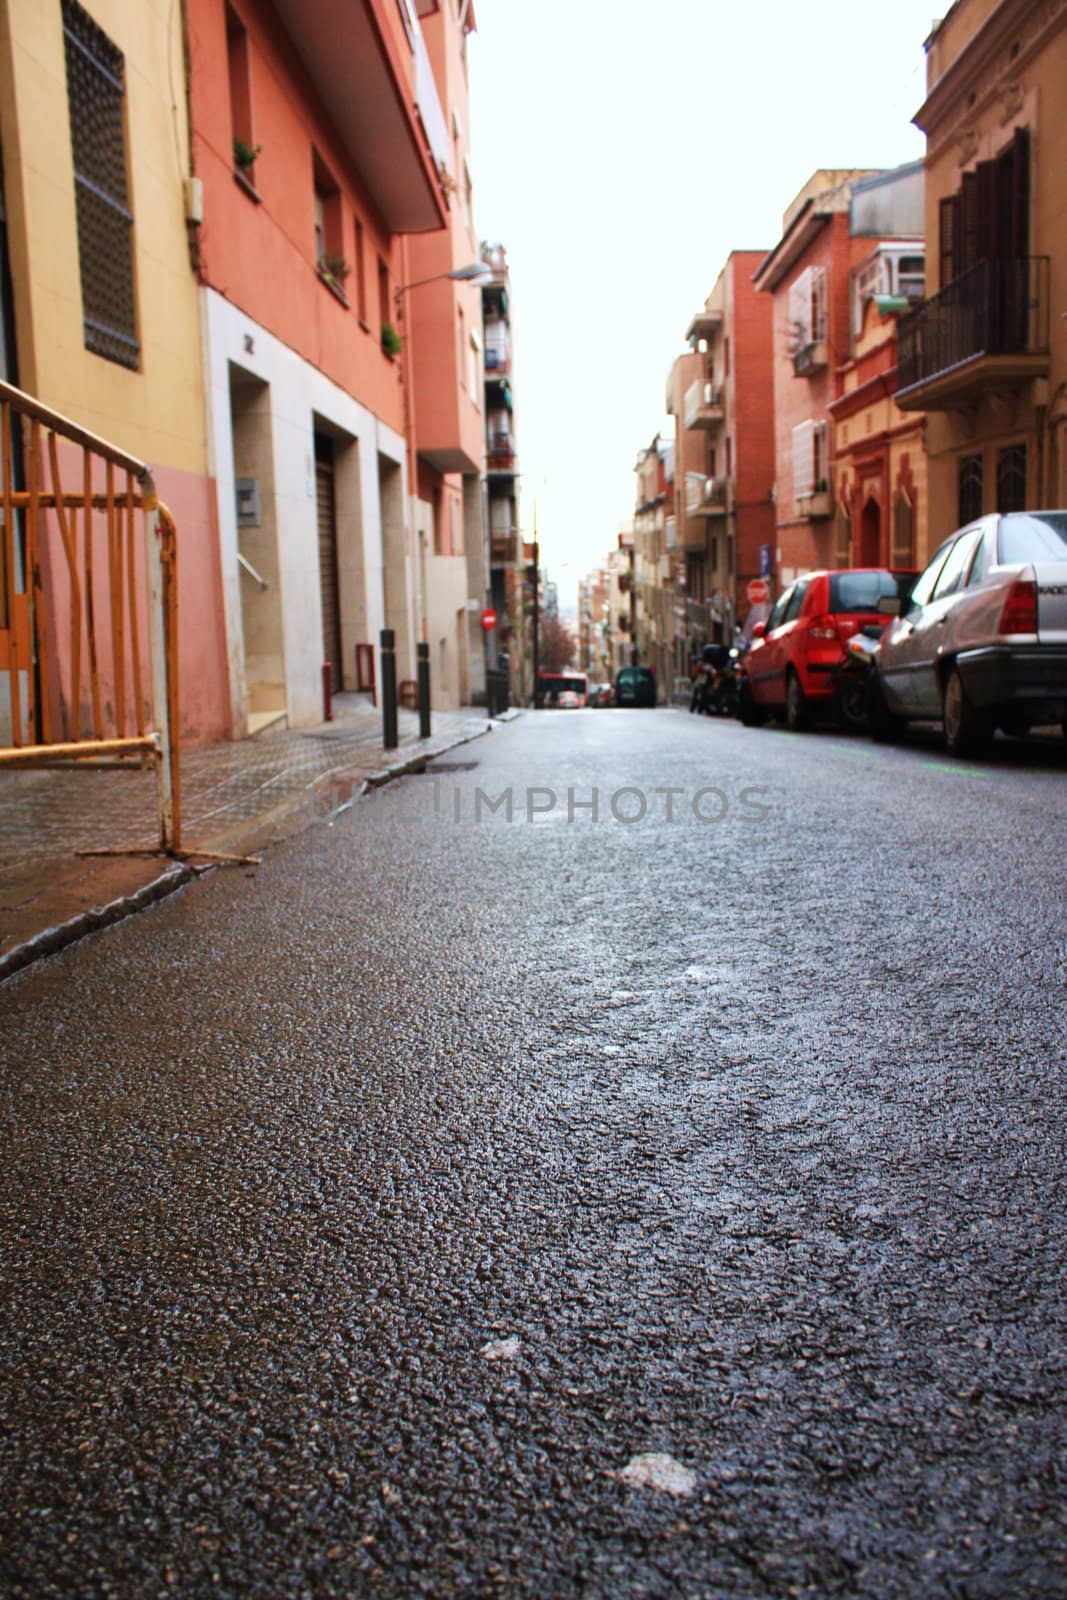 The wet way in the Spain